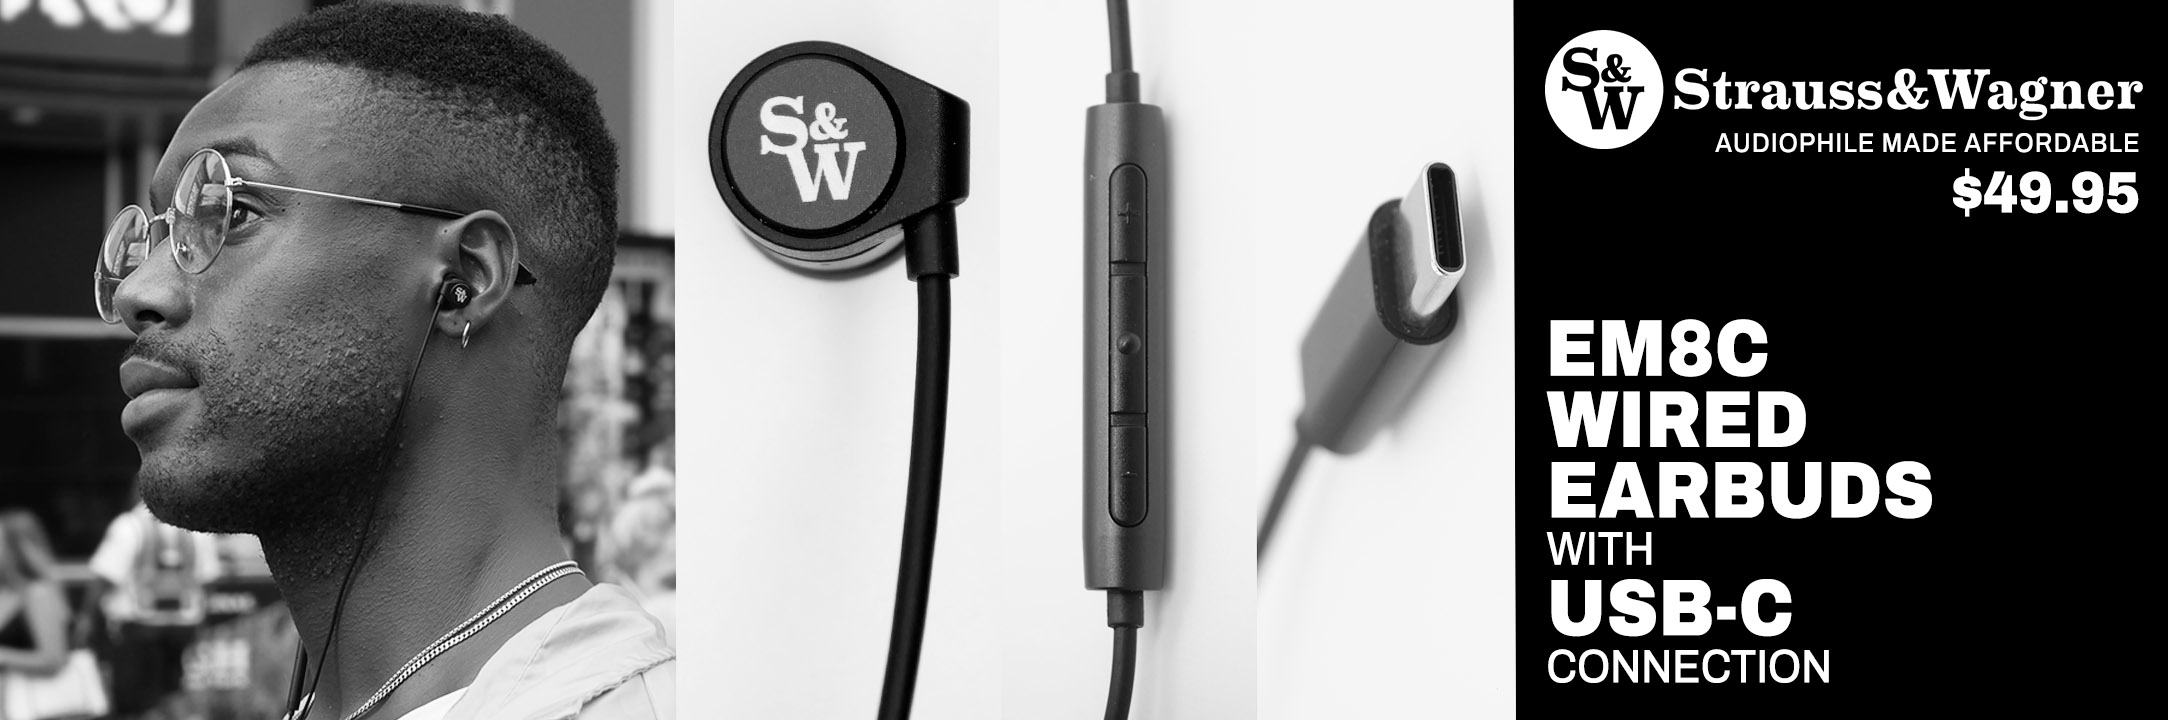 strauss and wagner em8c wired earbuds with usb-c connection